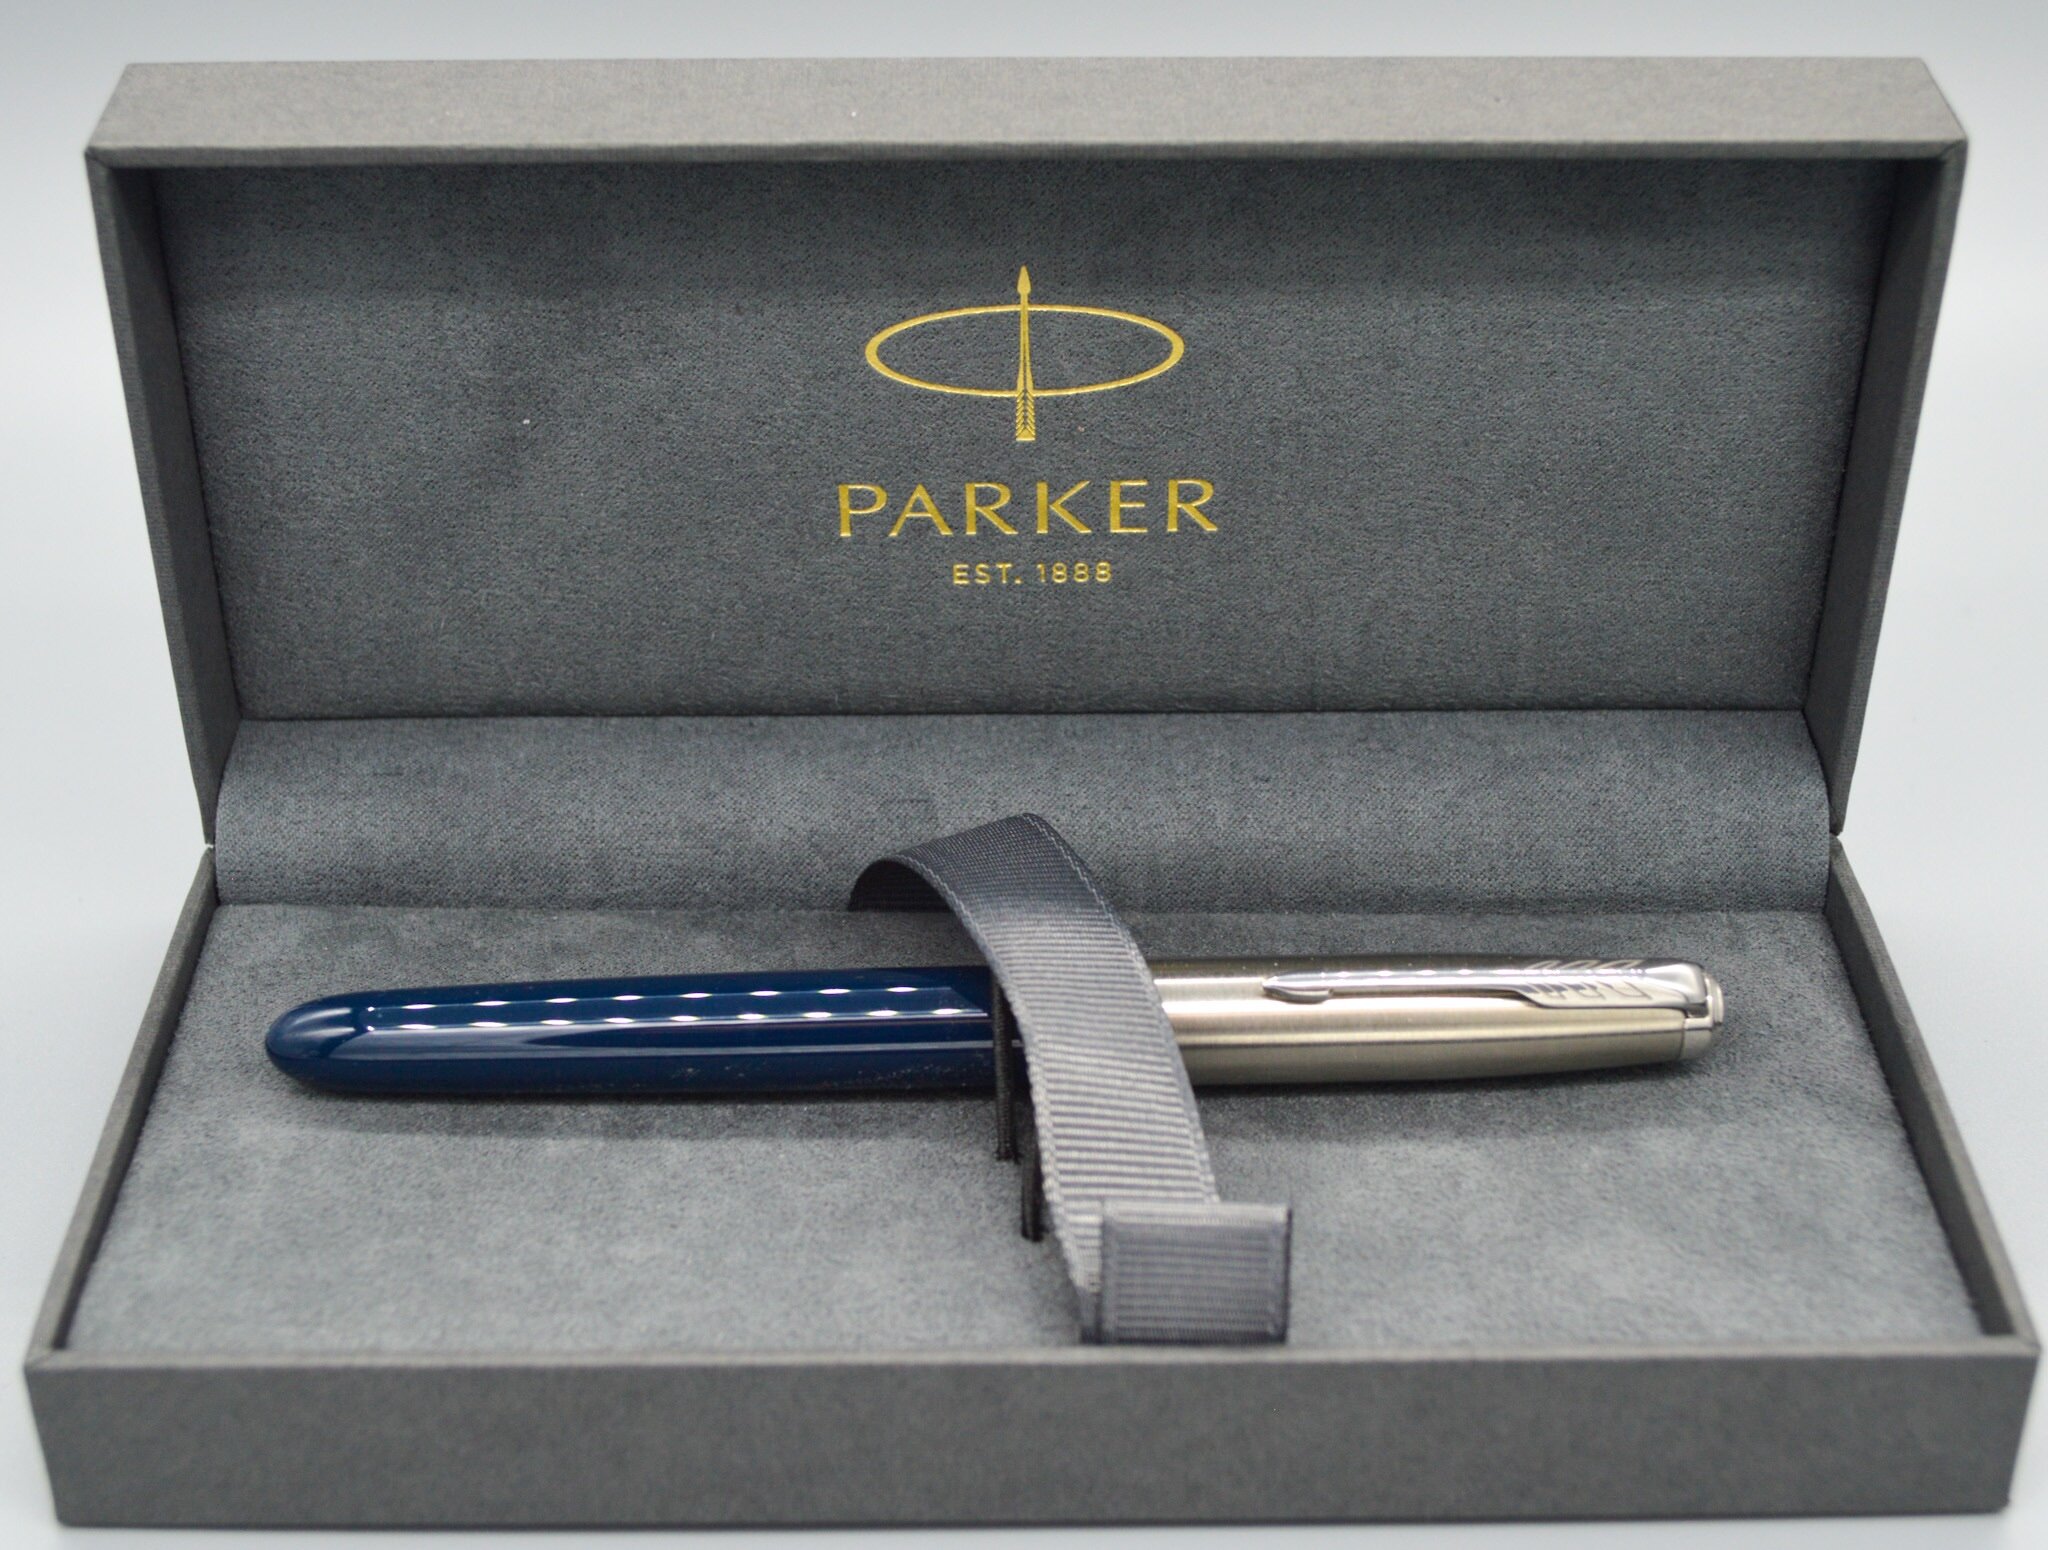 Perfect Parker pen in ballpoint pen blue ink you pick the color without the box